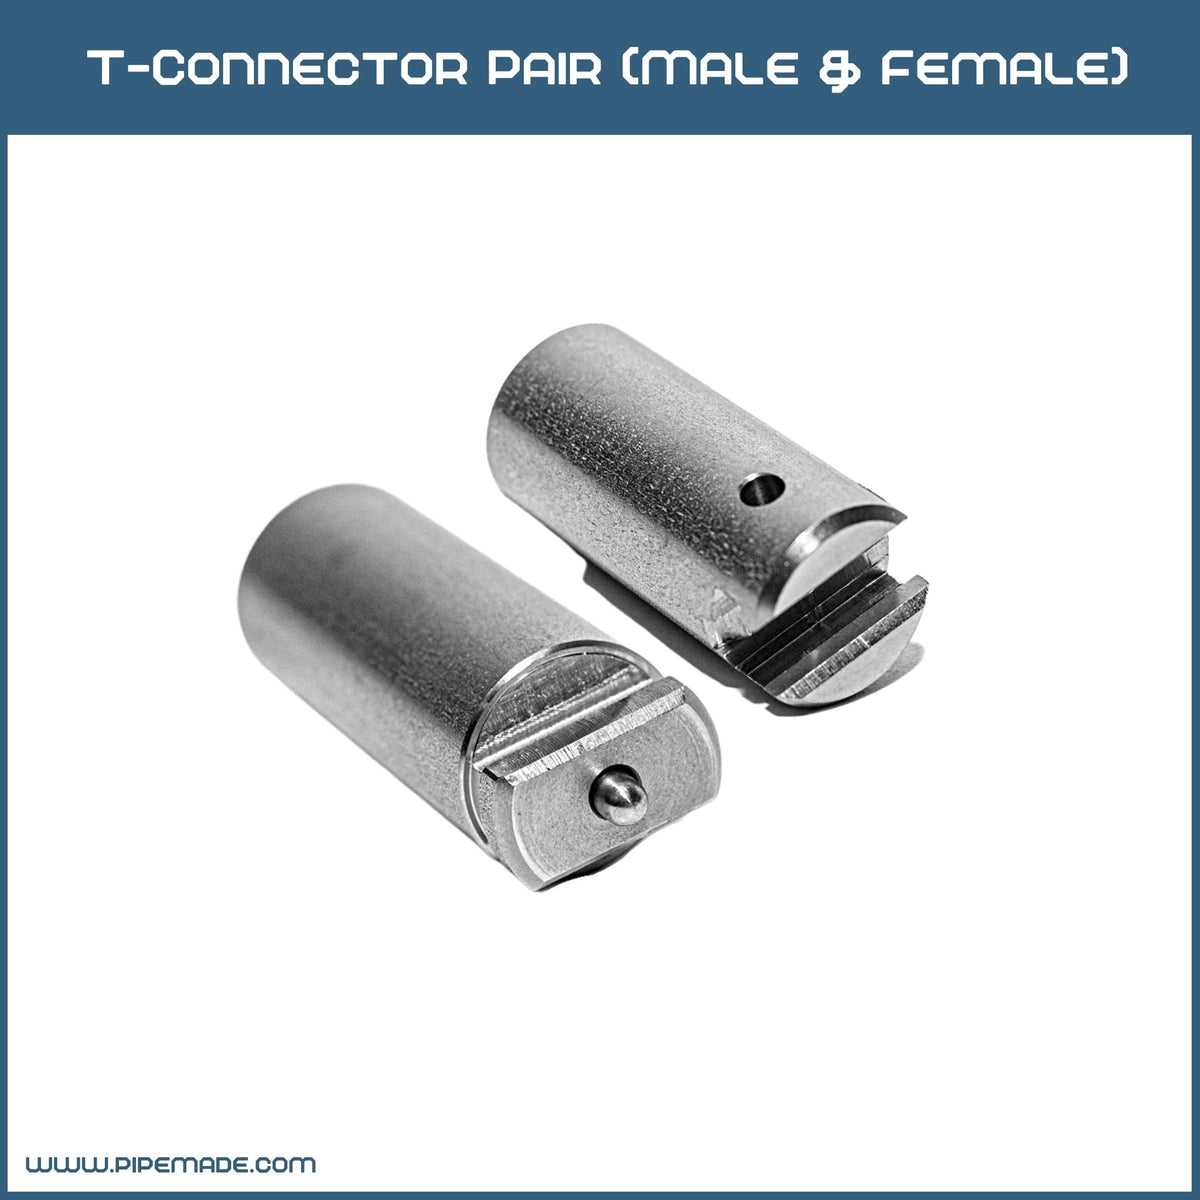 T-Connector Pair (Male & Female)